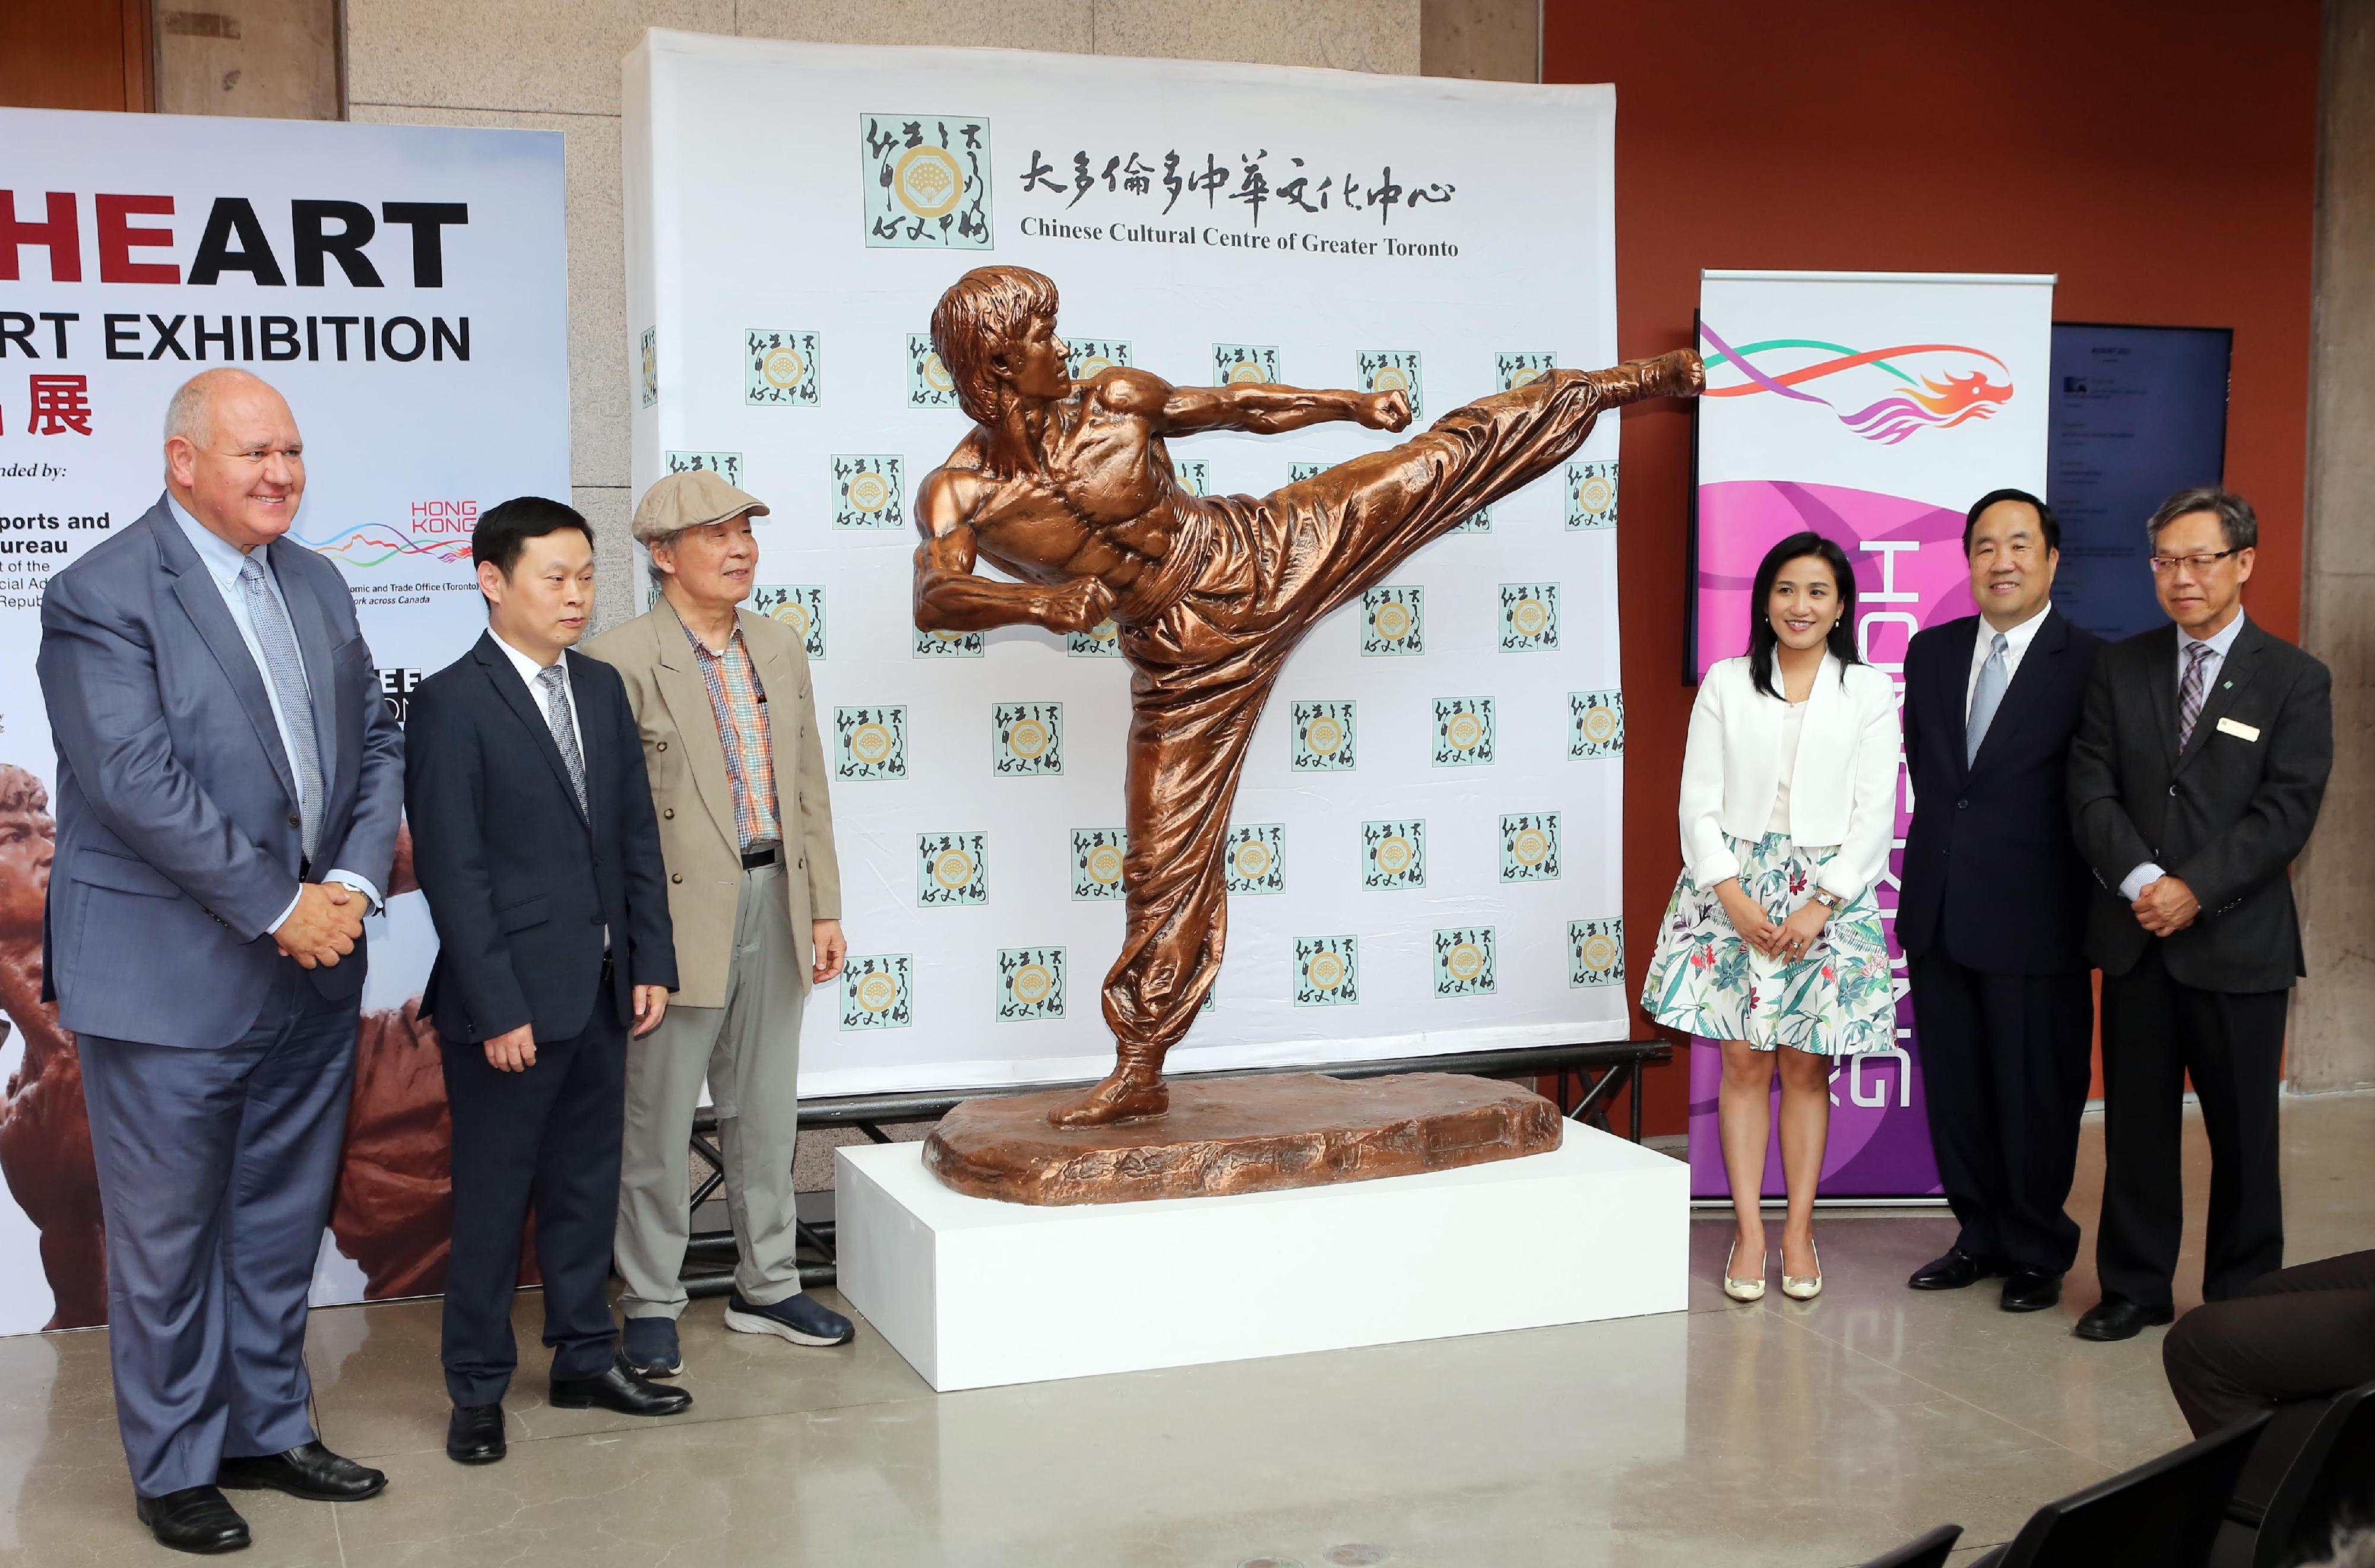 The Hong Kong Economic and Trade Office (Toronto) (Toronto ETO) presents the "Art at Heart - Chu Tat Shing Art Exhibition" as the debut of the 2023 Hong Kong Week on August 3 (Toronto time). Photo shows (from left) the Mayor of City of Markham, Mr Frank Scarpitti; the Acting Consul-General of the People’s Republic of China in Toronto, Mr Cheng Hongbo; the Director of the Toronto ETO, Ms Emily Mo; the Director for Americas of the Hong Kong Tourism Board, Mr Michael Lim; and the Chairman of Chinese Cultural Centre of Greater Toronto, Mr Alan Lam, officiating at the opening ceremony.